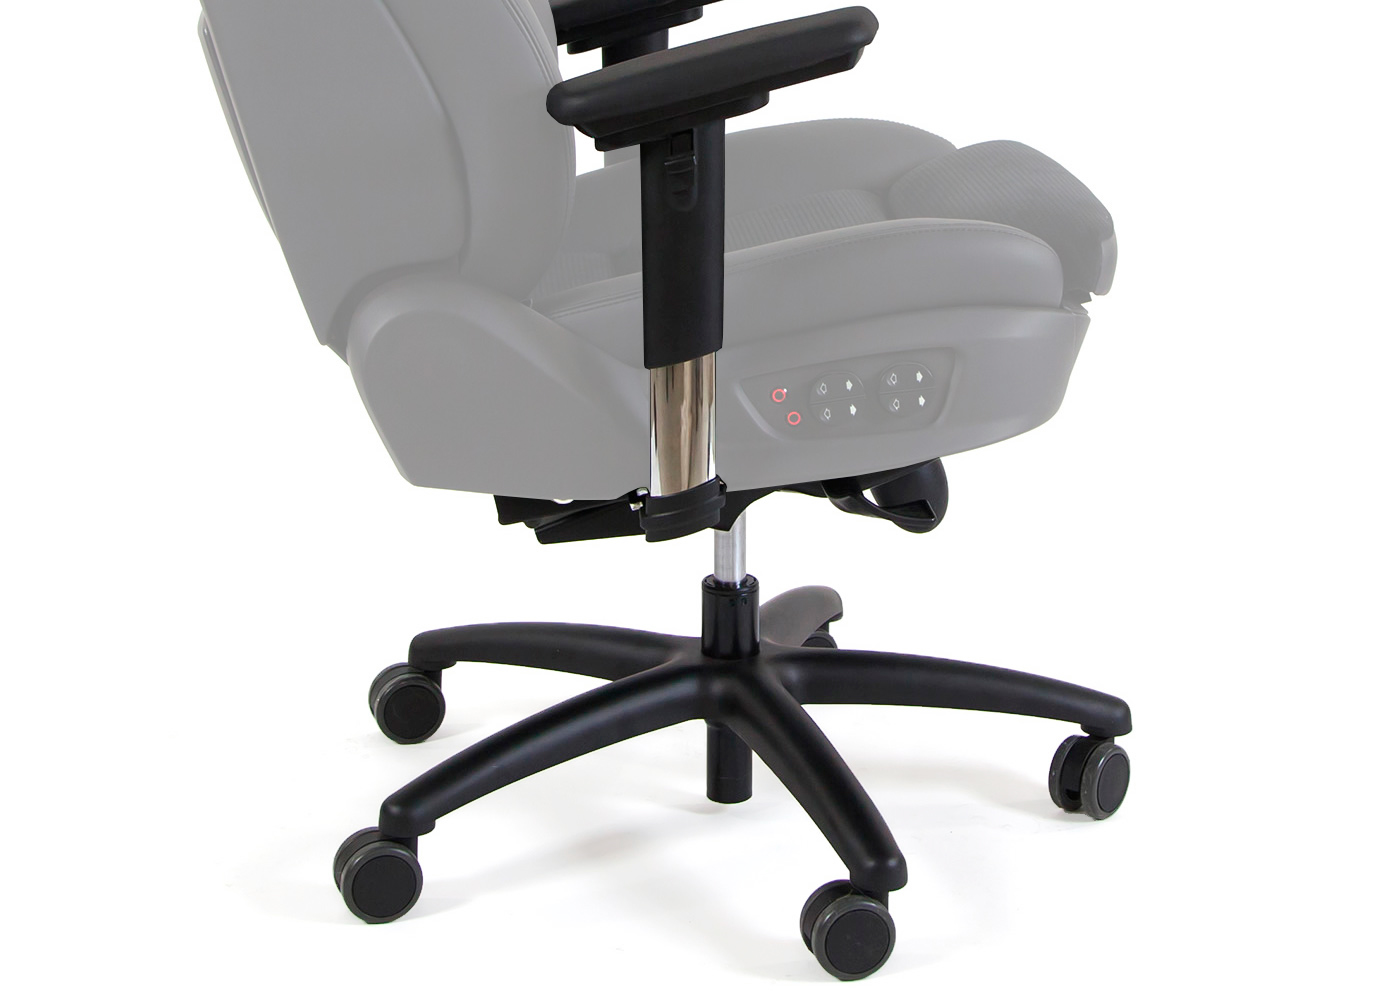 Boss-Chairs - Office Car Chairs with Quality European Furniture Fittings